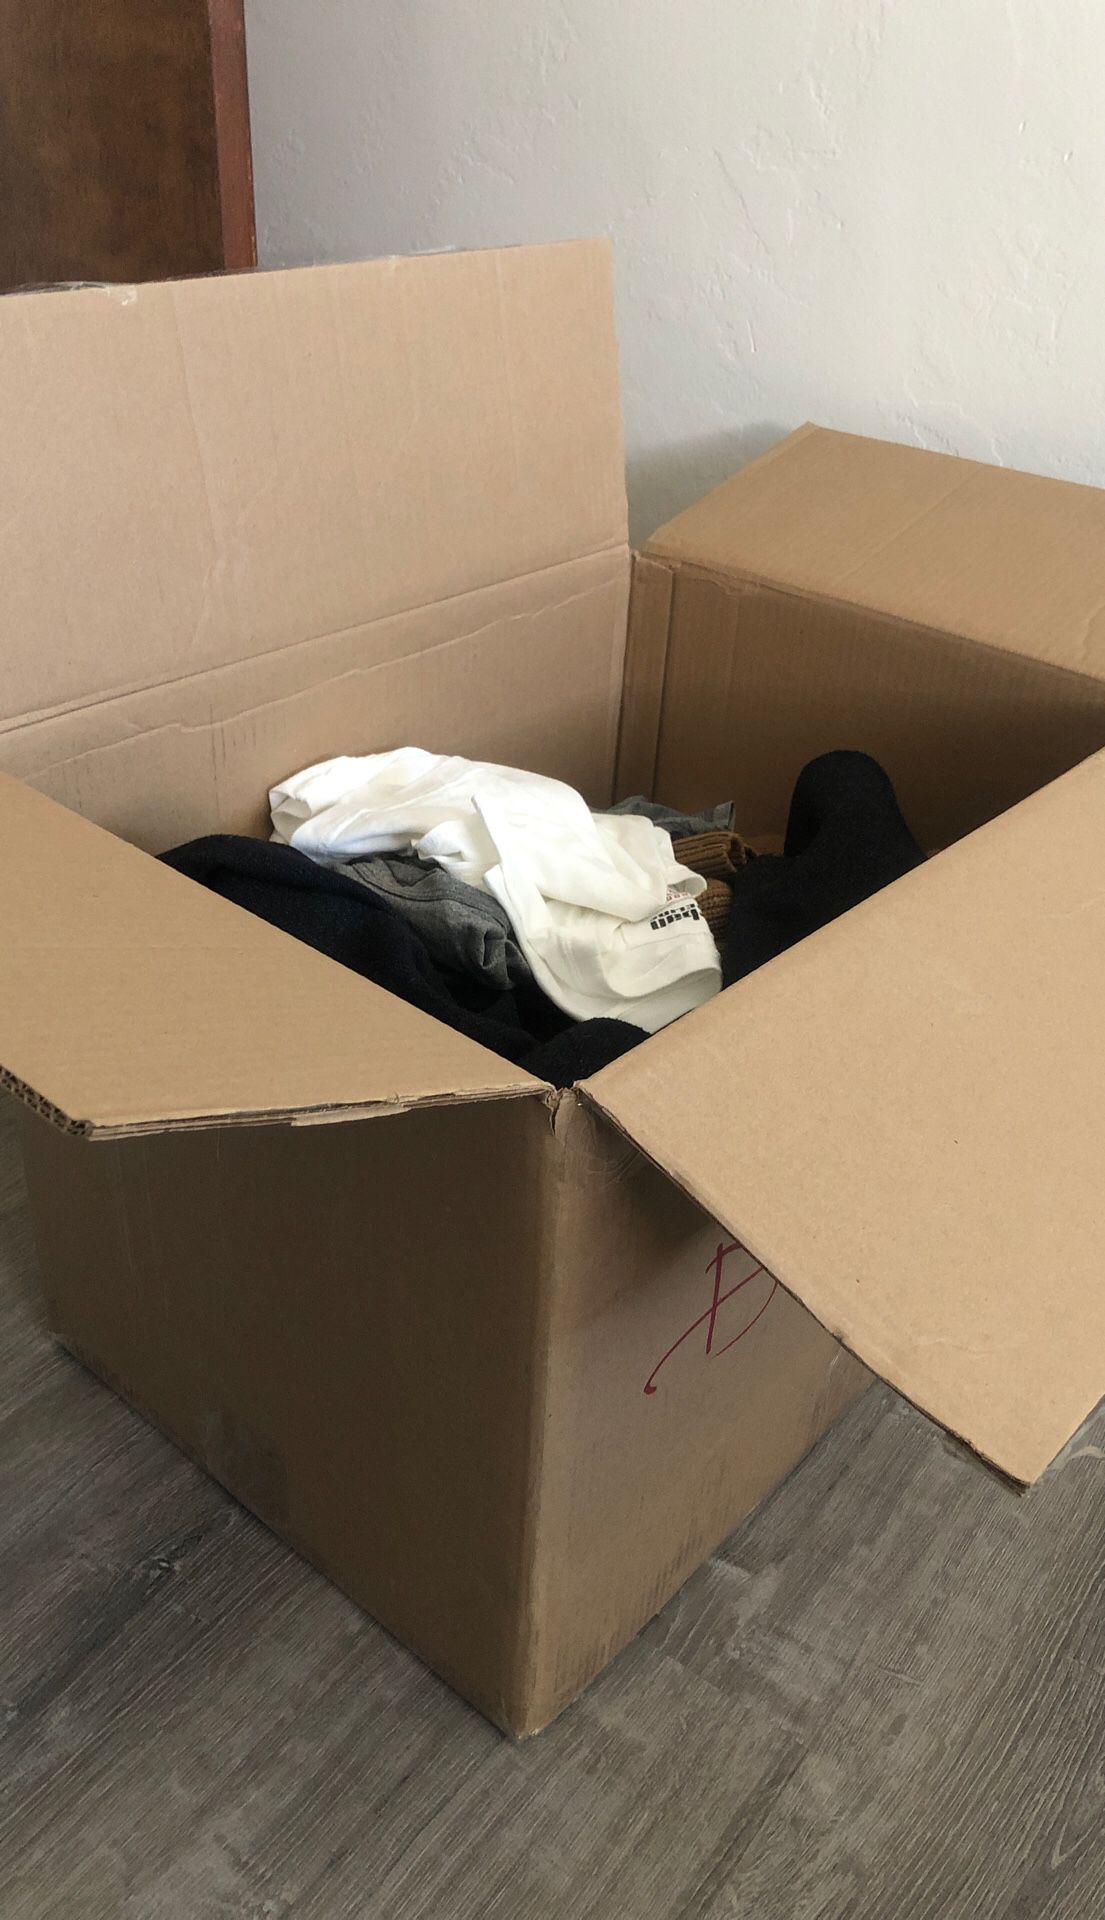 Box of Clothes (+20)